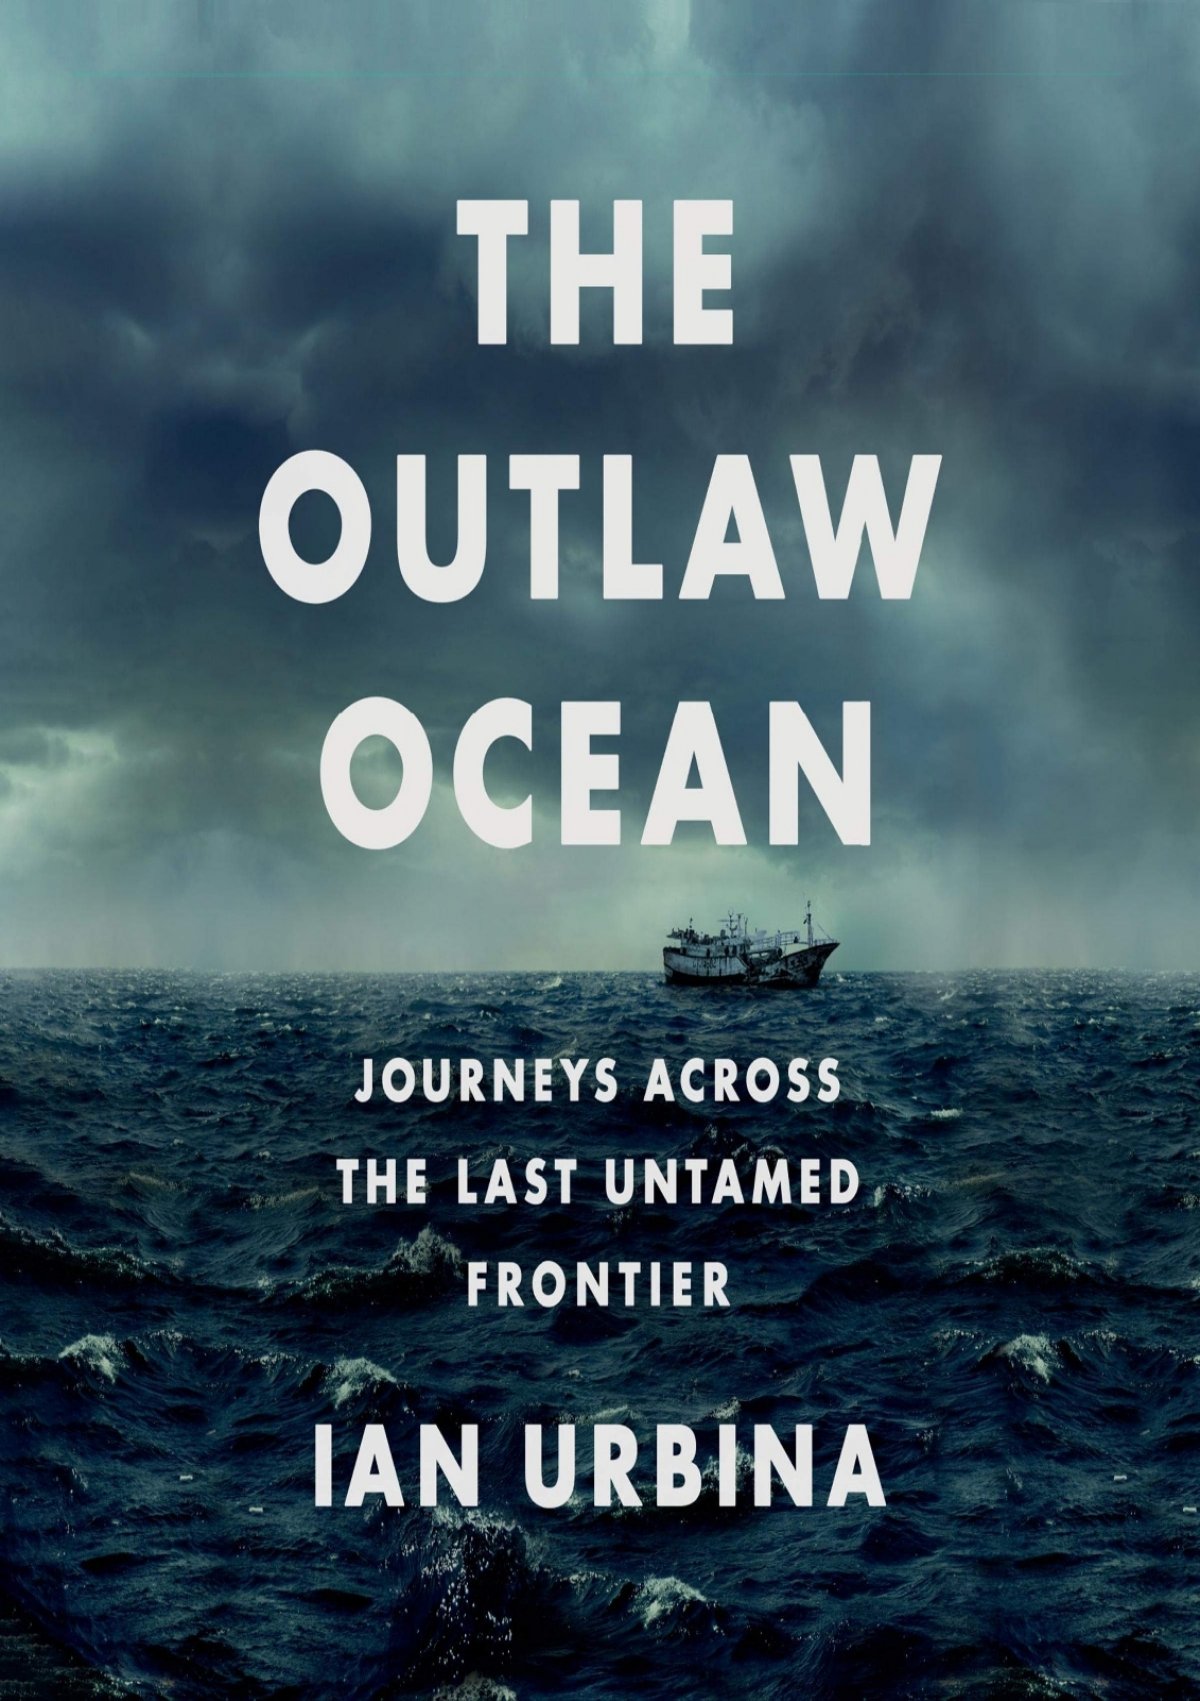 pdf-the-outlaw-ocean-journeys-across-the-last-untamed-frontier